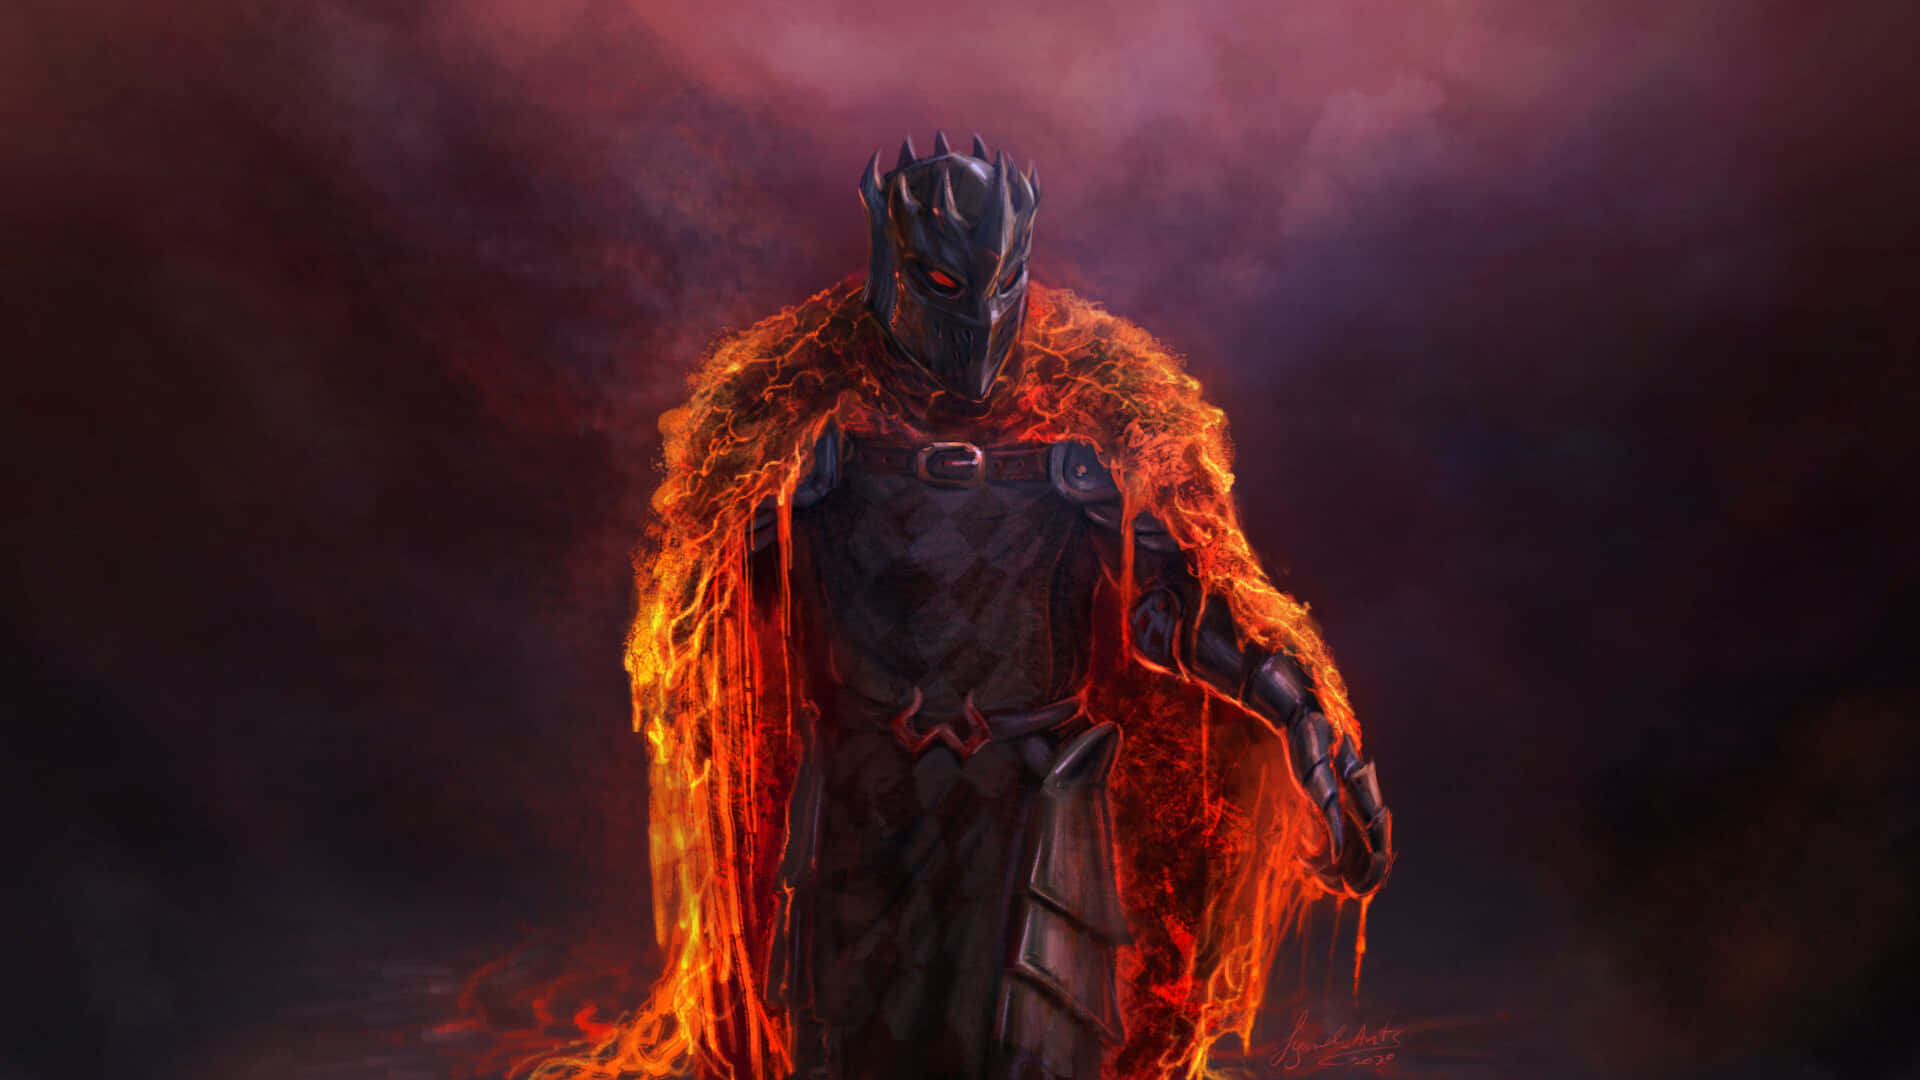 A Man In A Robe With Flames On His Back